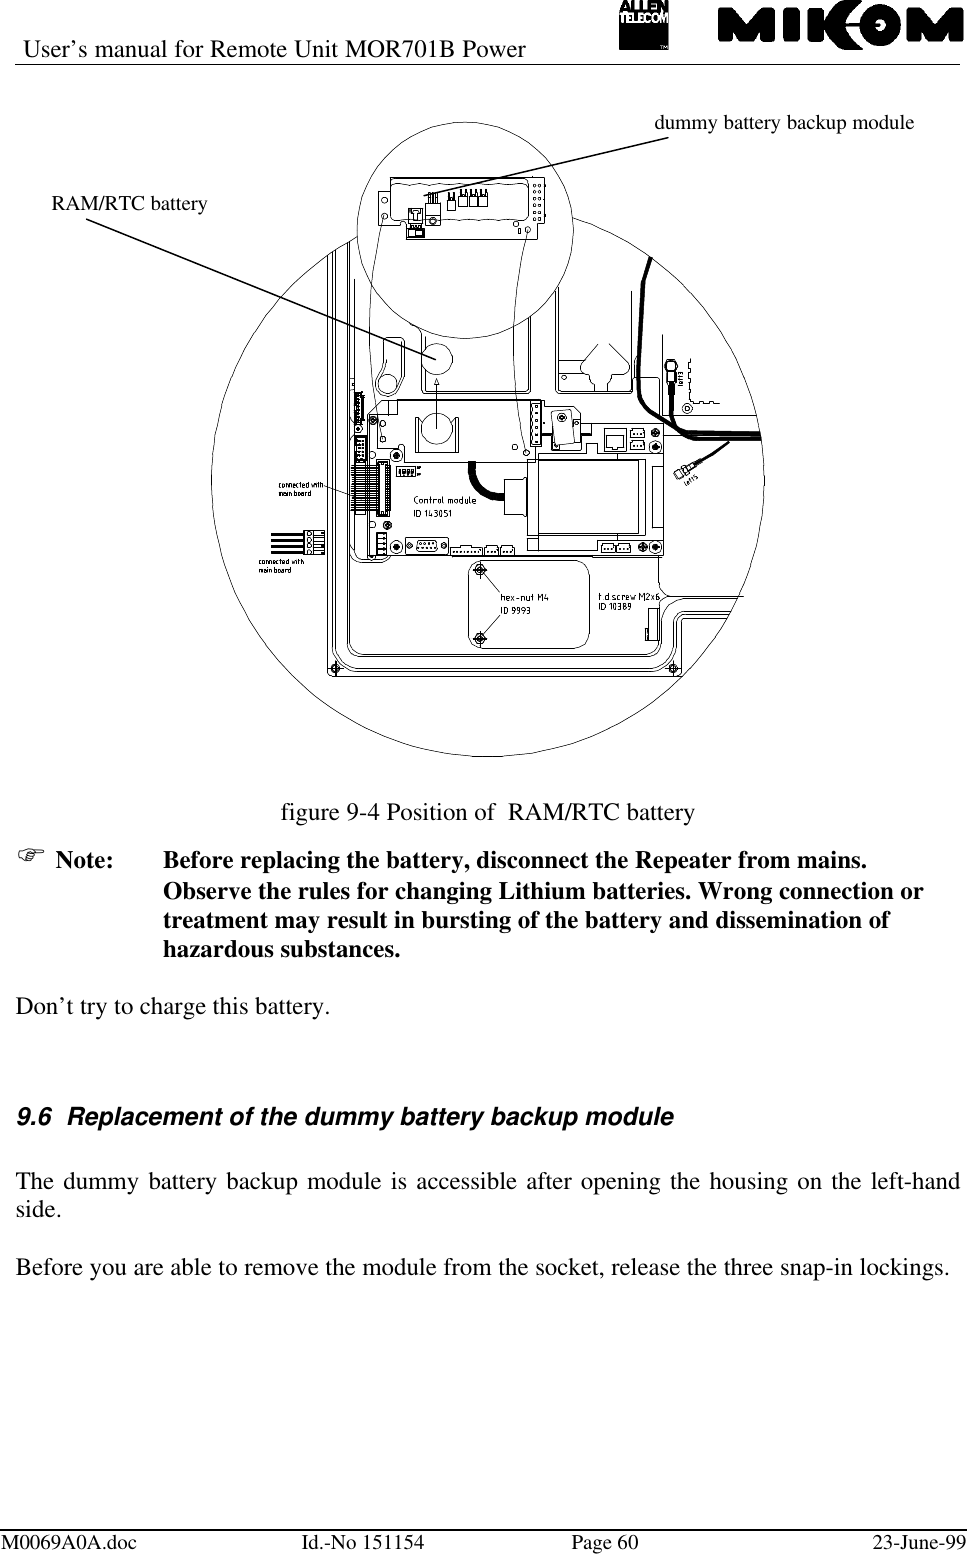 User’s manual for Remote Unit MOR701B PowerM0069A0A.doc Id.-No 151154 Page 60 23-June-99figure 9-4 Position of  RAM/RTC batteryF Note: Before replacing the battery, disconnect the Repeater from mains.Observe the rules for changing Lithium batteries. Wrong connection ortreatment may result in bursting of the battery and dissemination ofhazardous substances.Don’t try to charge this battery.9.6 Replacement of the dummy battery backup moduleThe dummy battery backup module is accessible after opening the housing on the left-handside.Before you are able to remove the module from the socket, release the three snap-in lockings.RAM/RTC batterydummy battery backup module